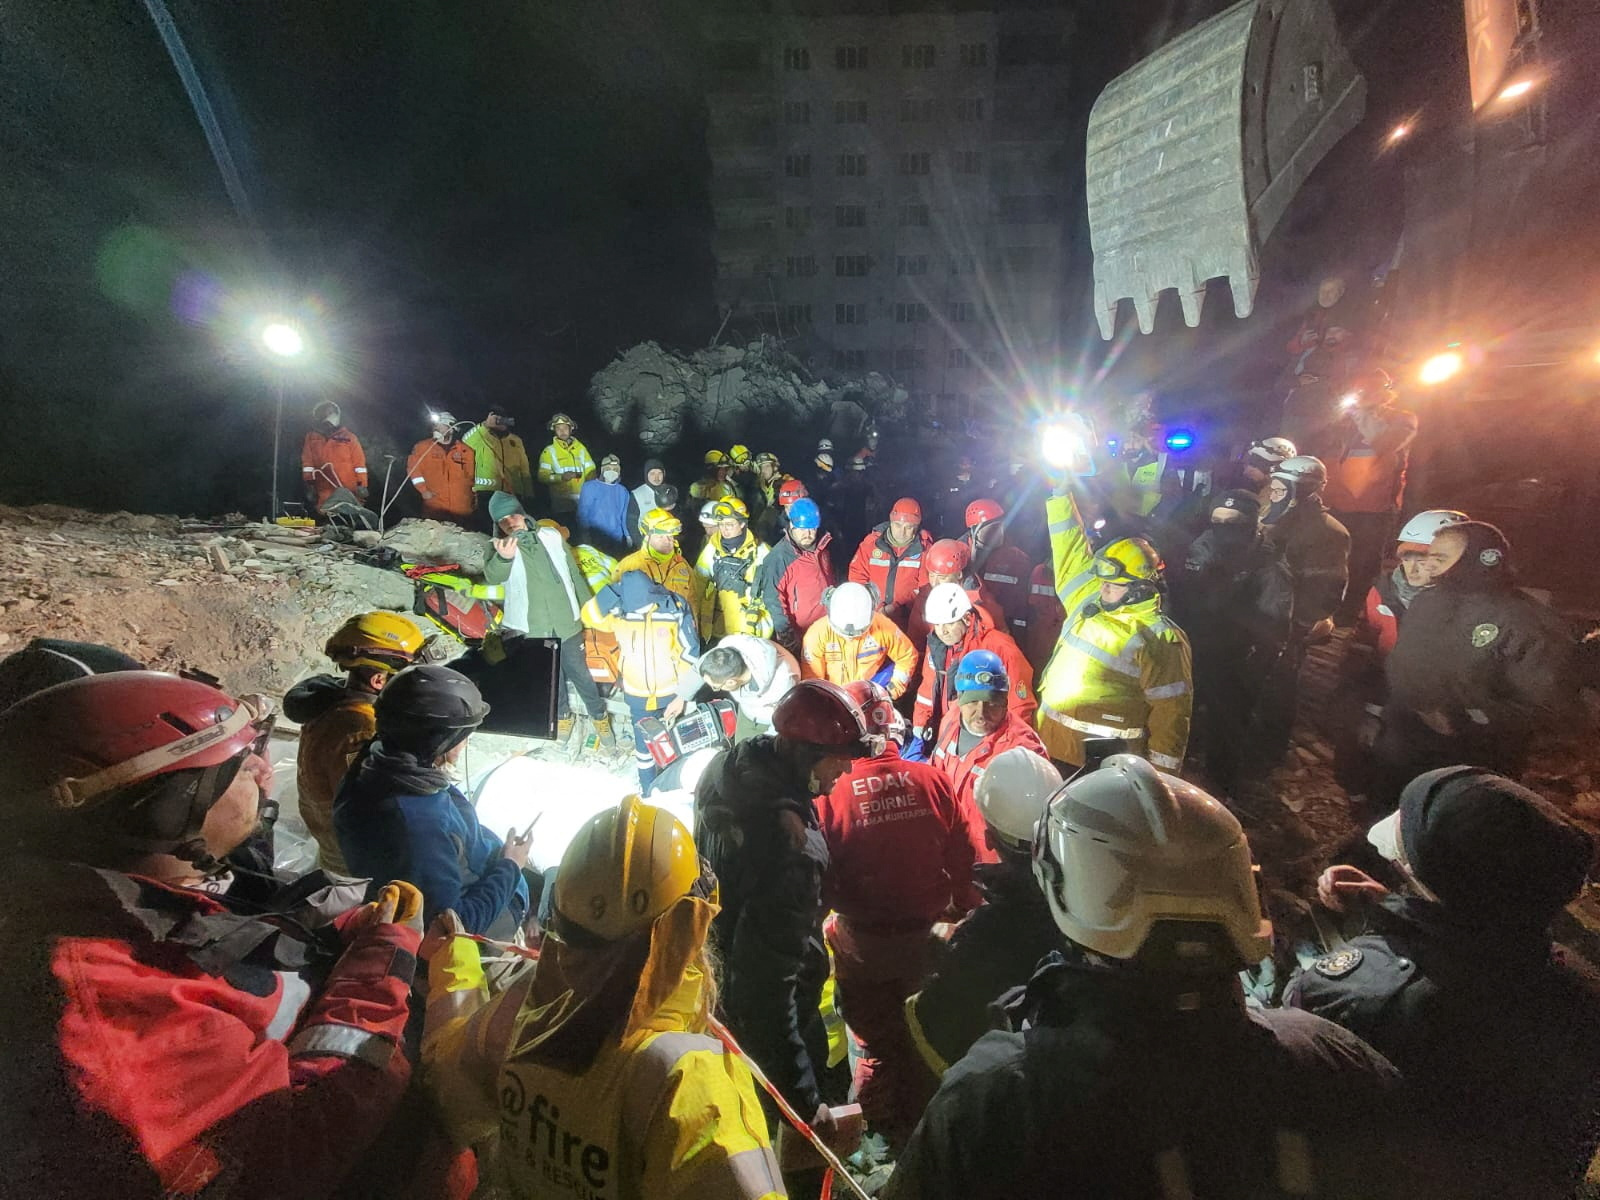 Rescue workers try to rescue a 15-year-old girl trapped under the rubble, in the aftermath of a deadly earthquake in Kahramanmaras, Turkey February 10, 2023. @fire - Internationaler Katastrophenschutz/Handout via REUTERS turkey syria quake rescue